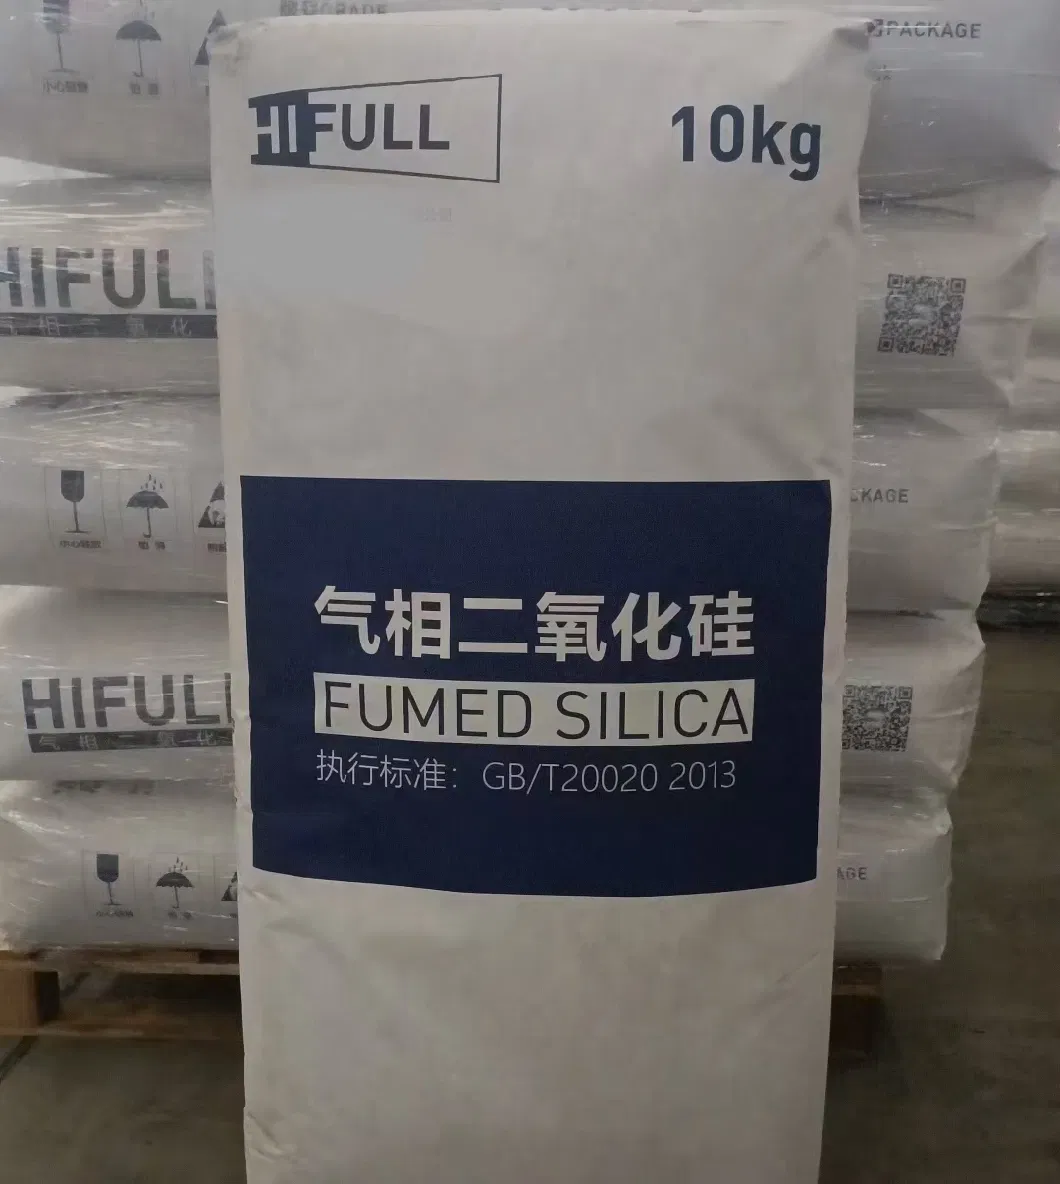 Wholesales Fumed Silica Used for Chemical Products Nano-Grade Powder